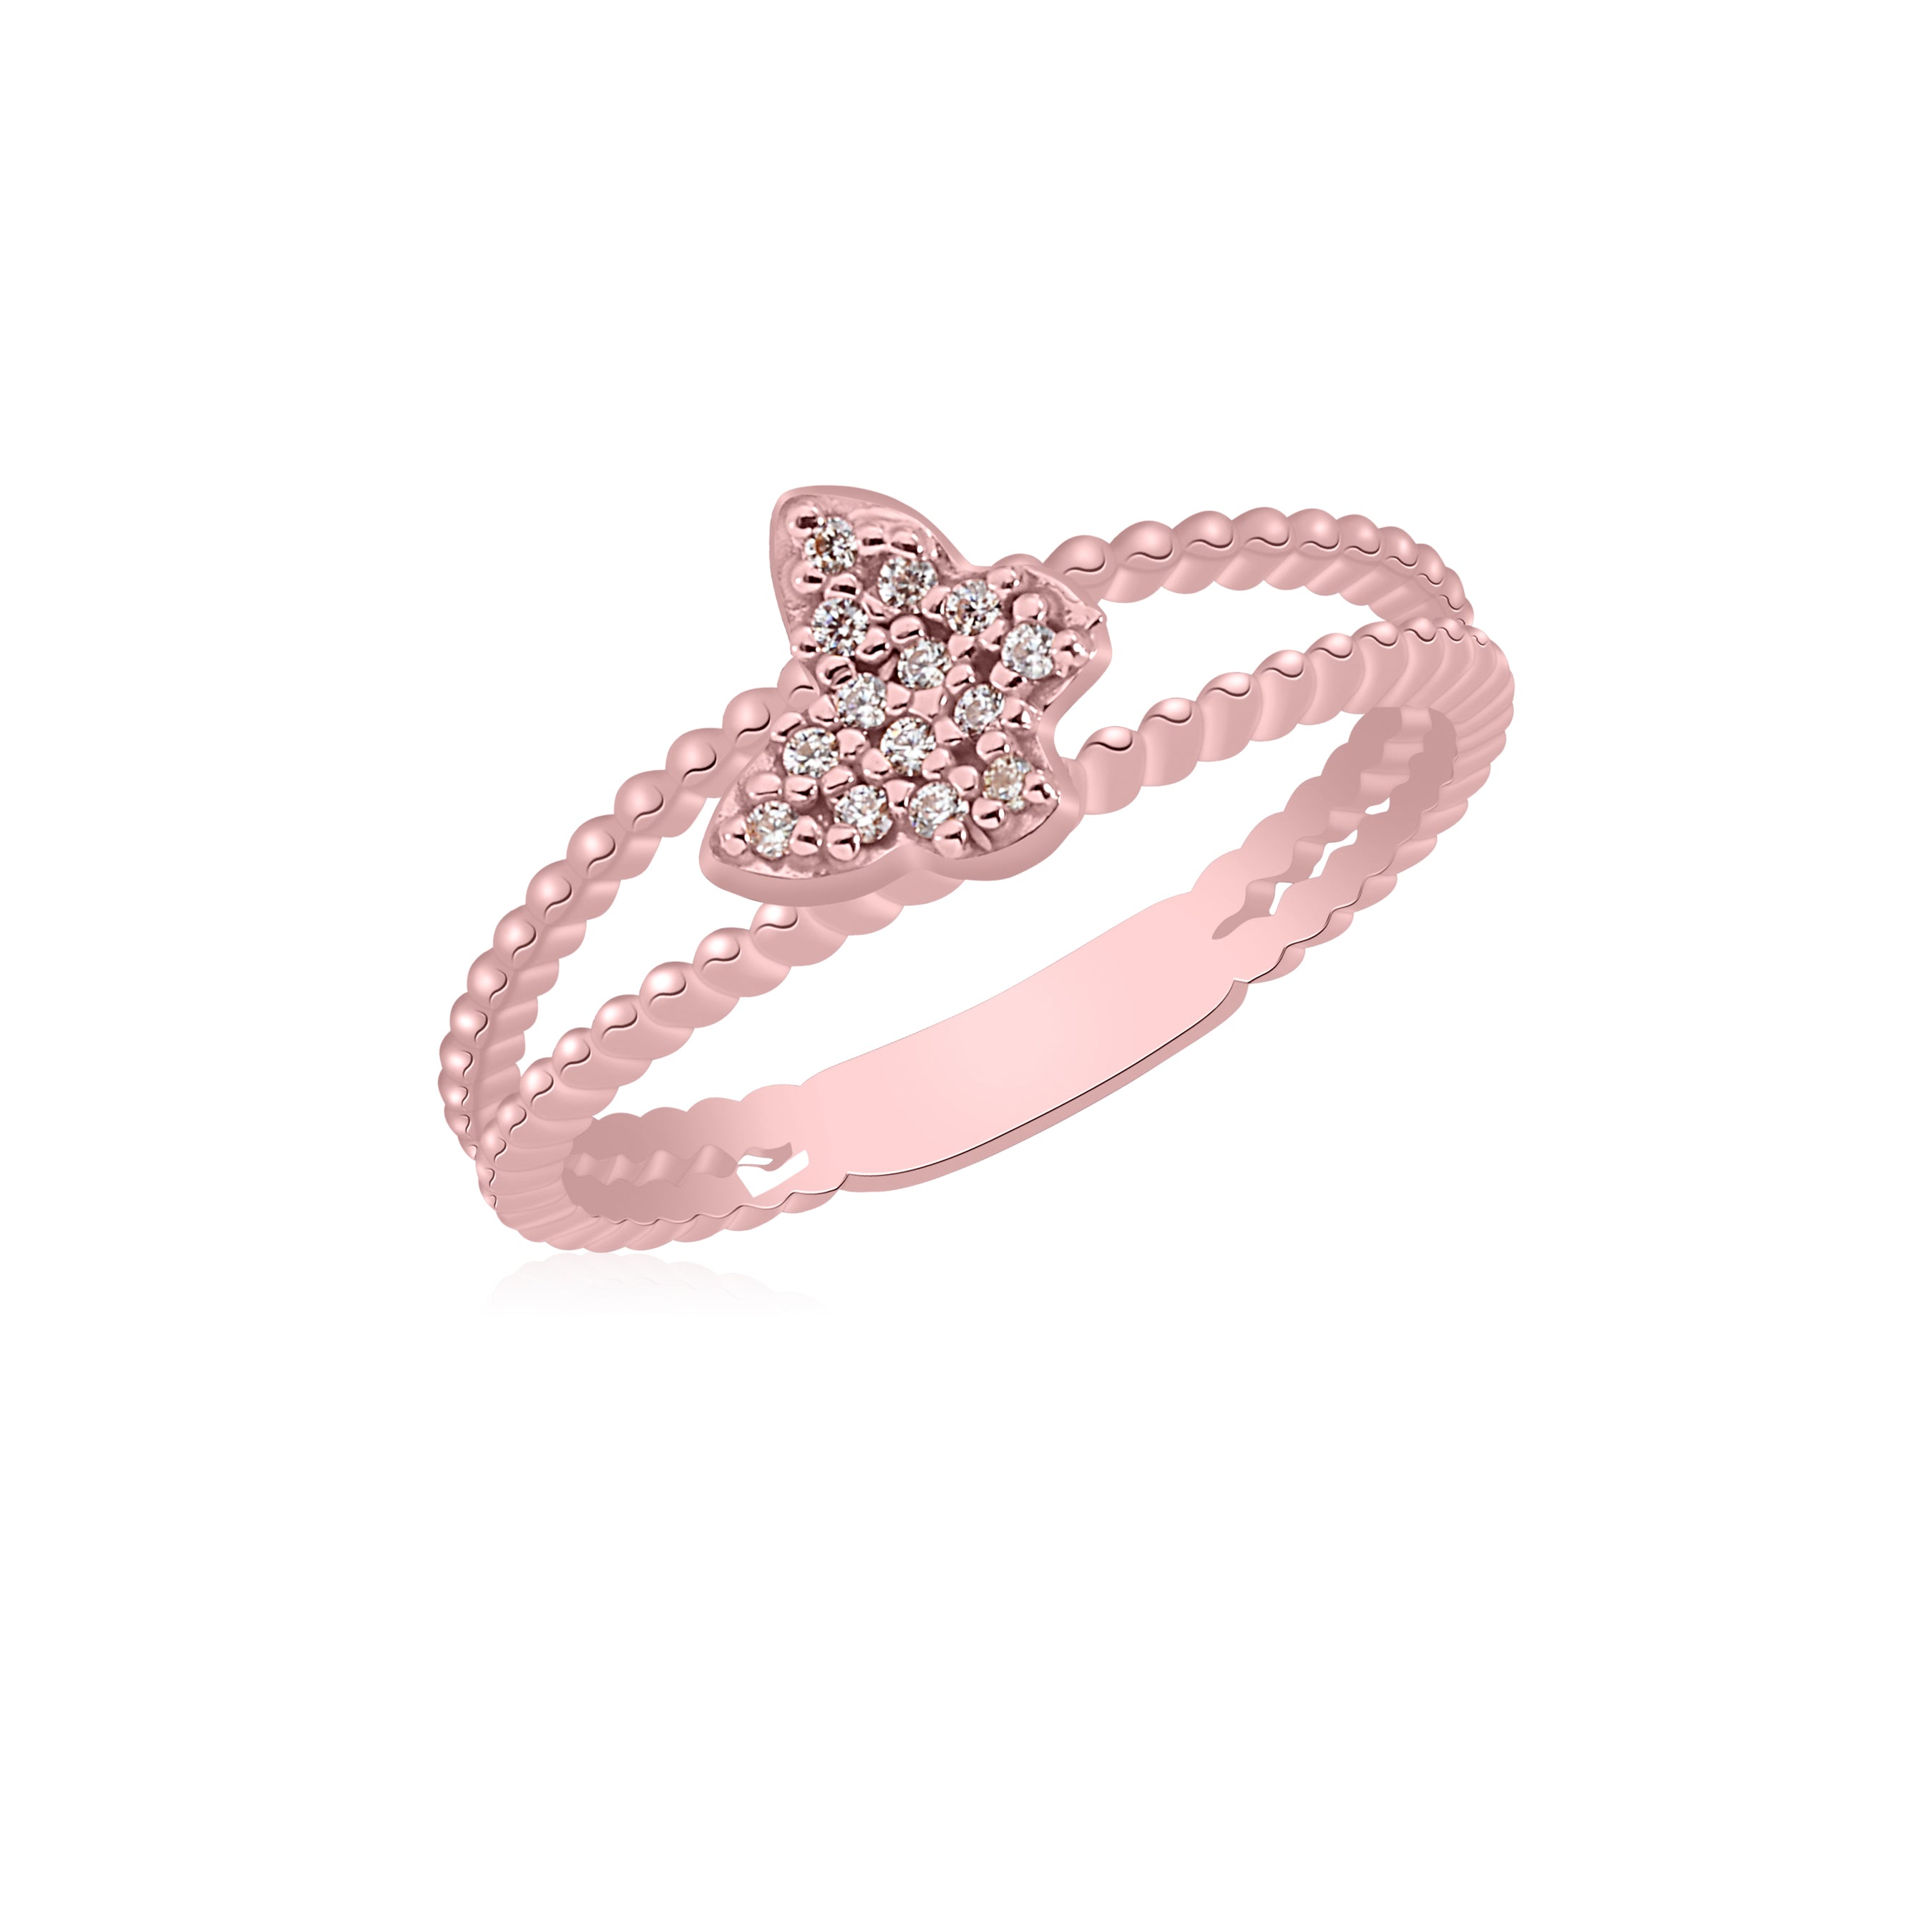 UNICORNJ 14K Rose Gold Double Band Beaded Ring with Pave CZ Butterfly Accent Italy